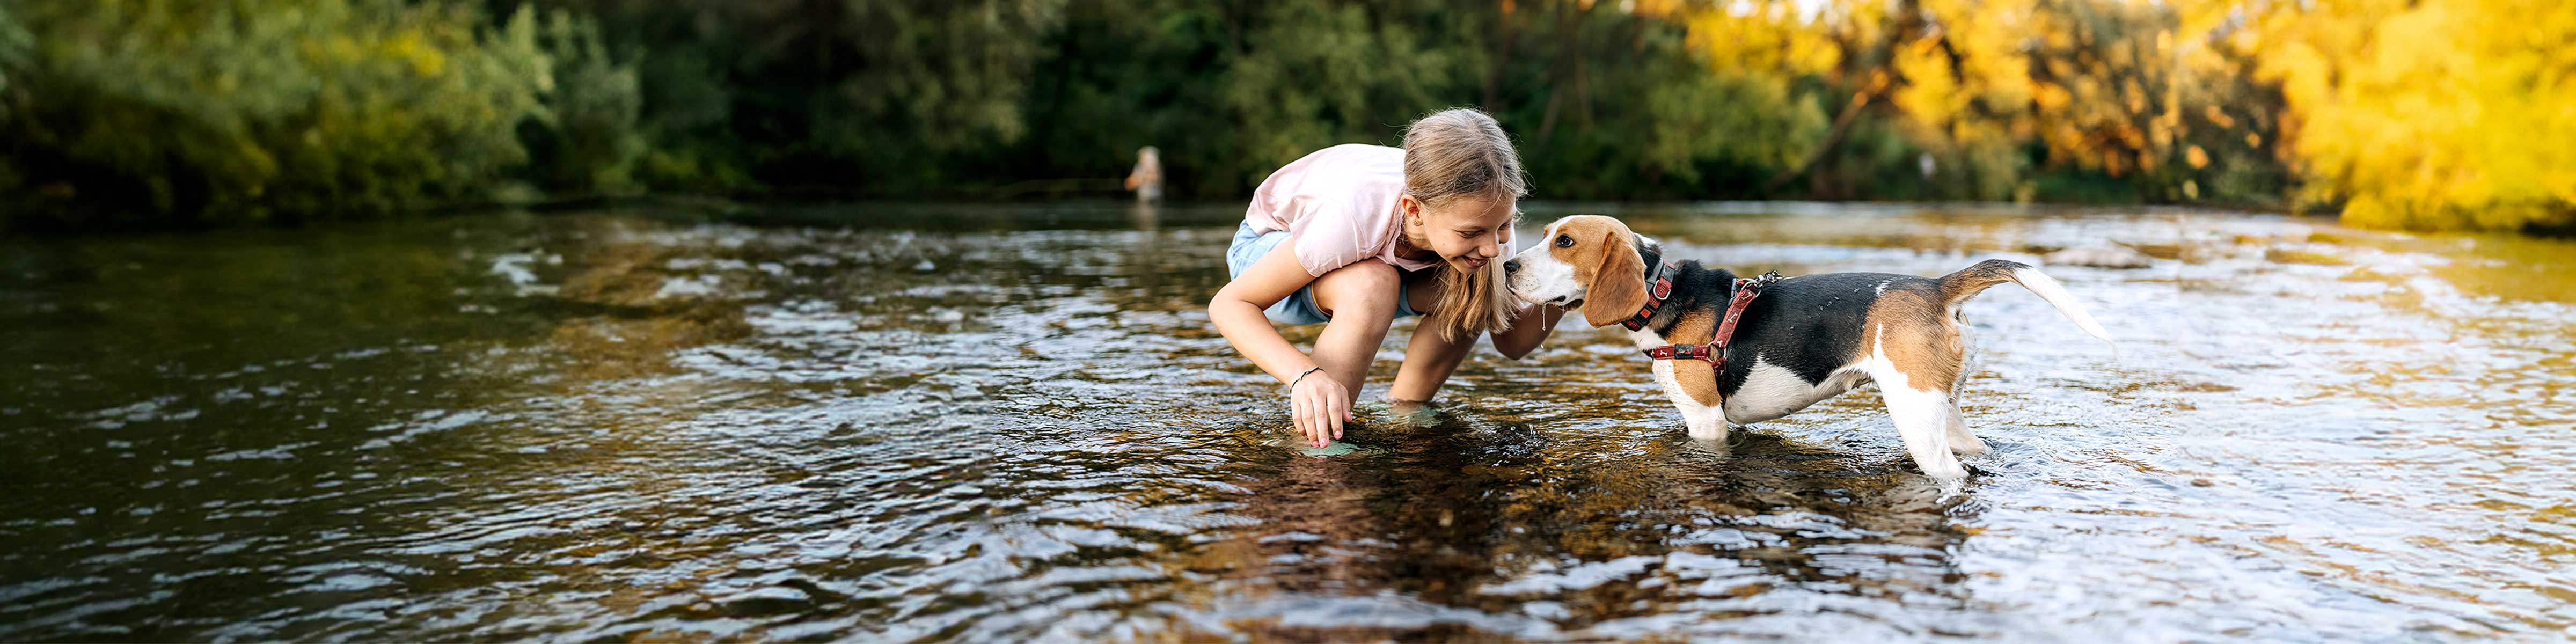 A young girl and a dog play in the river